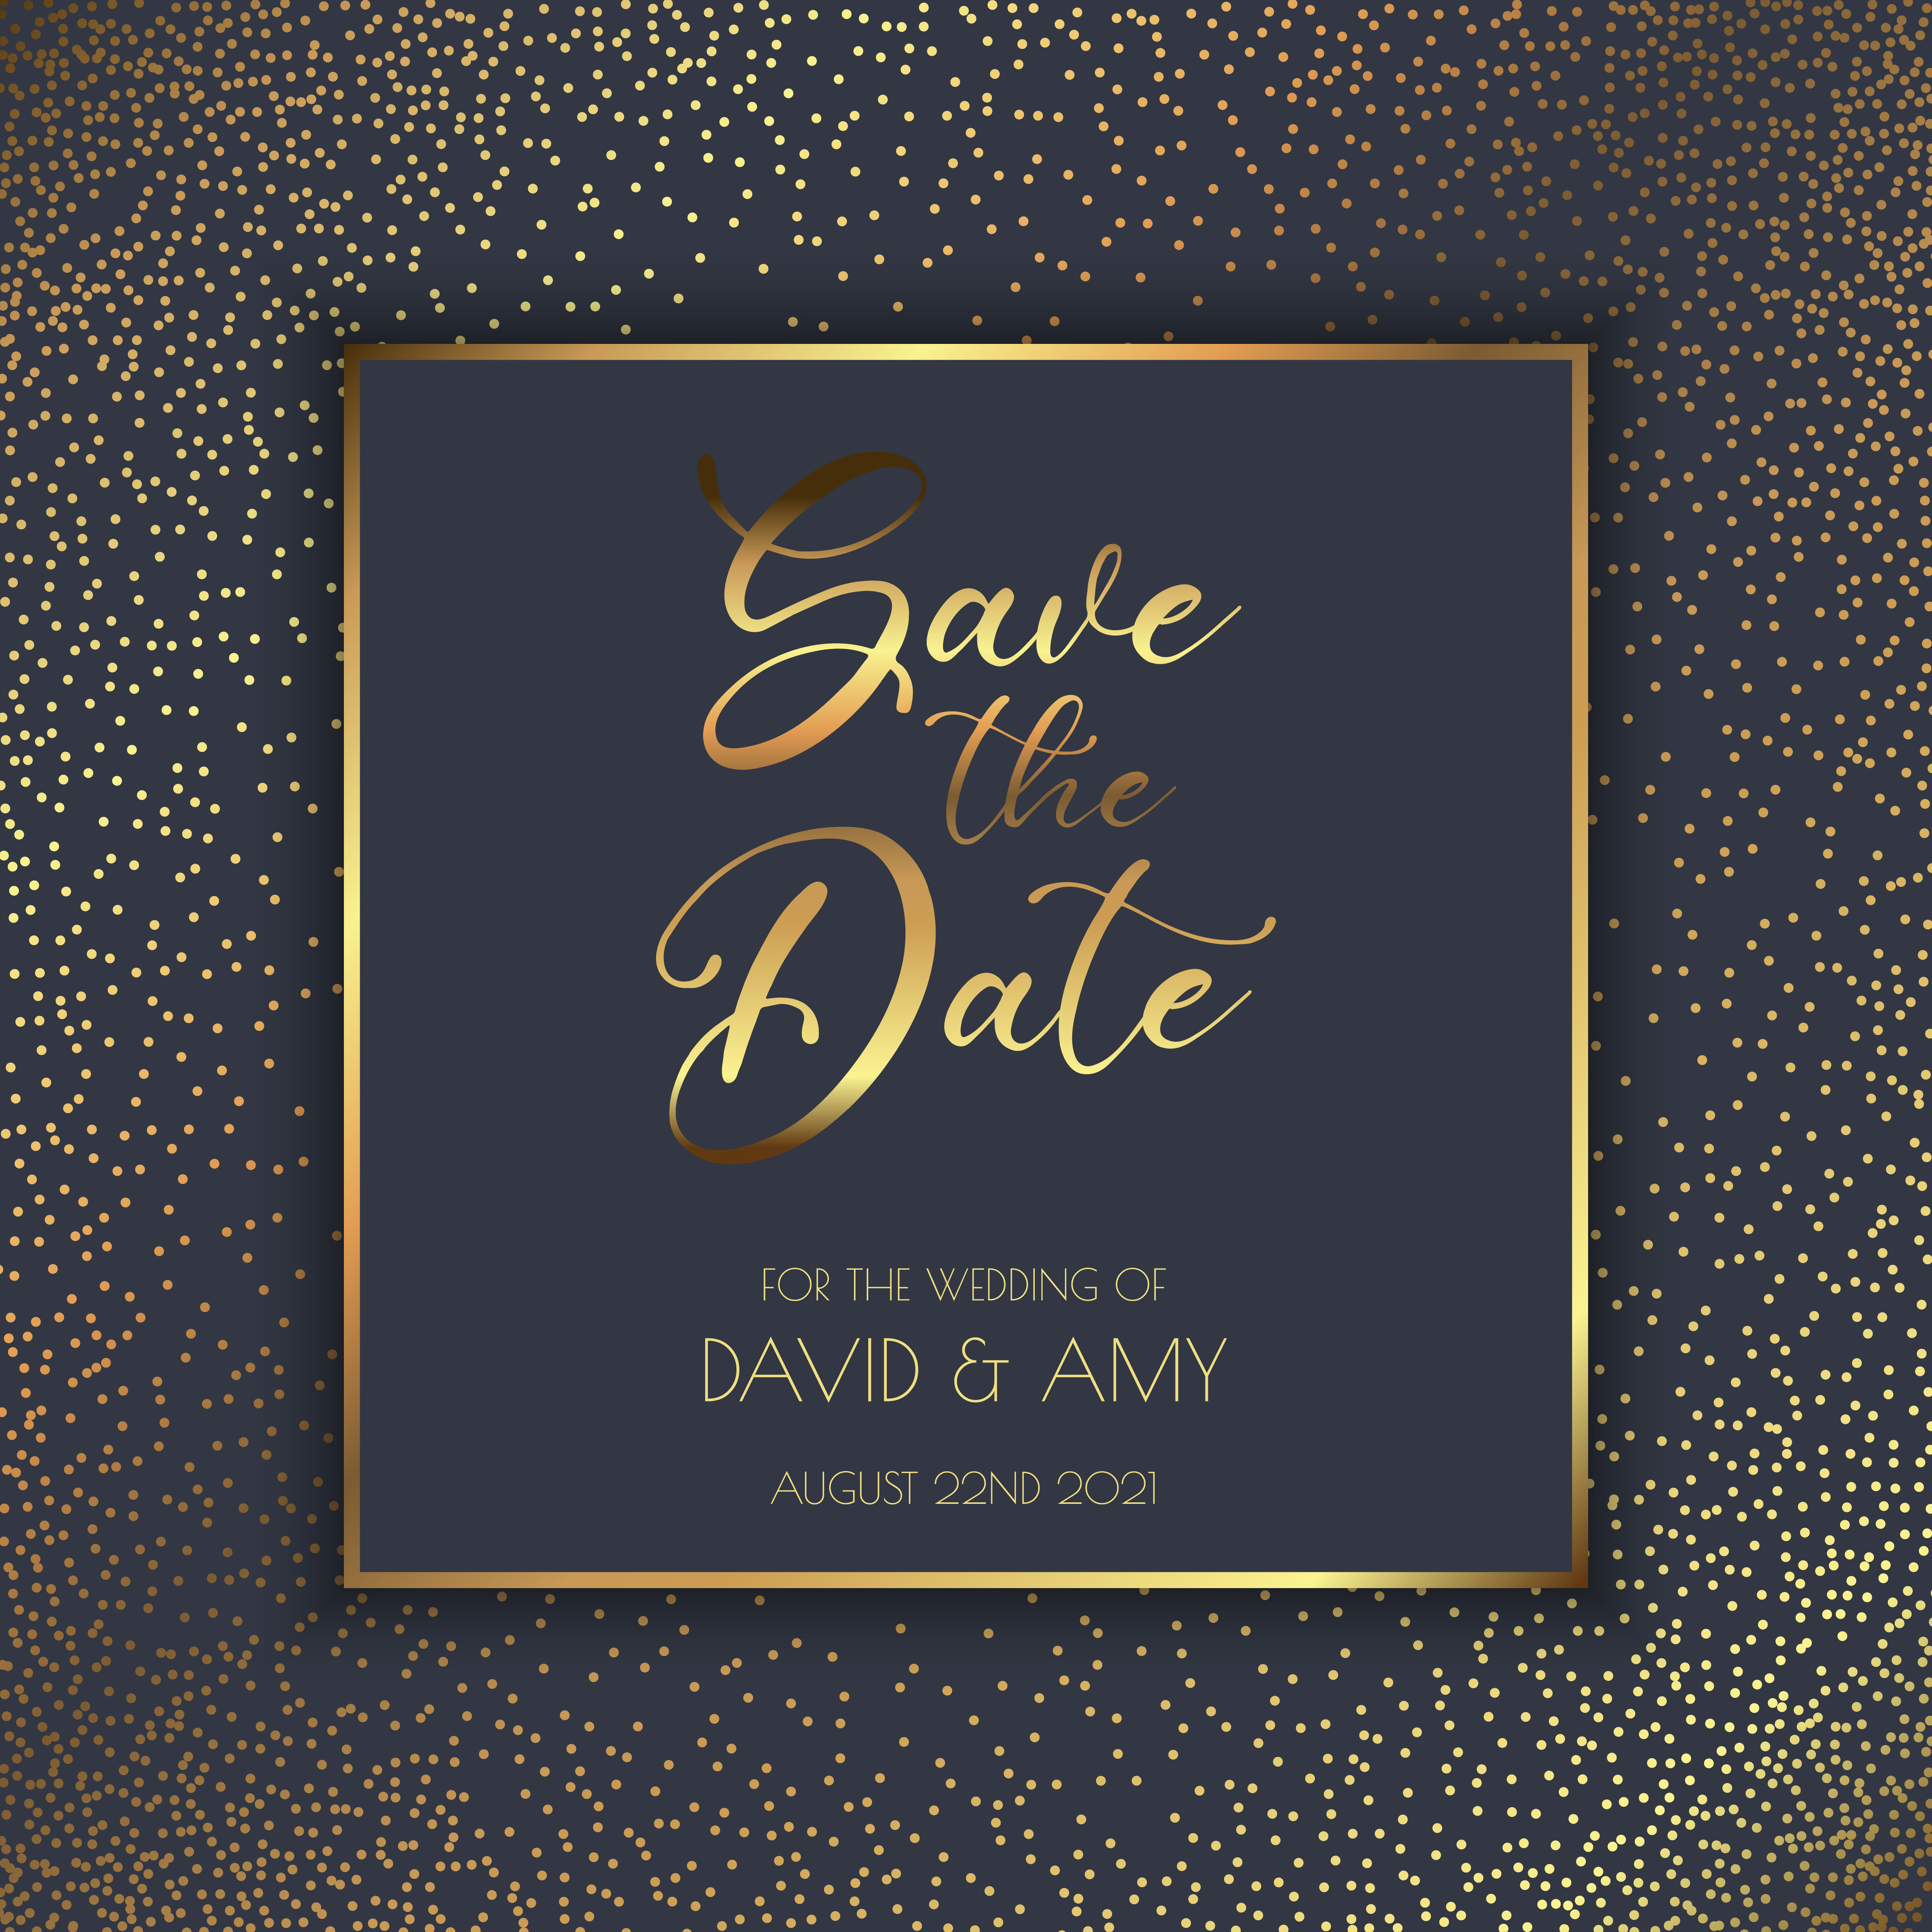 Save the date invitation template with black and gold 695427 Vector Art